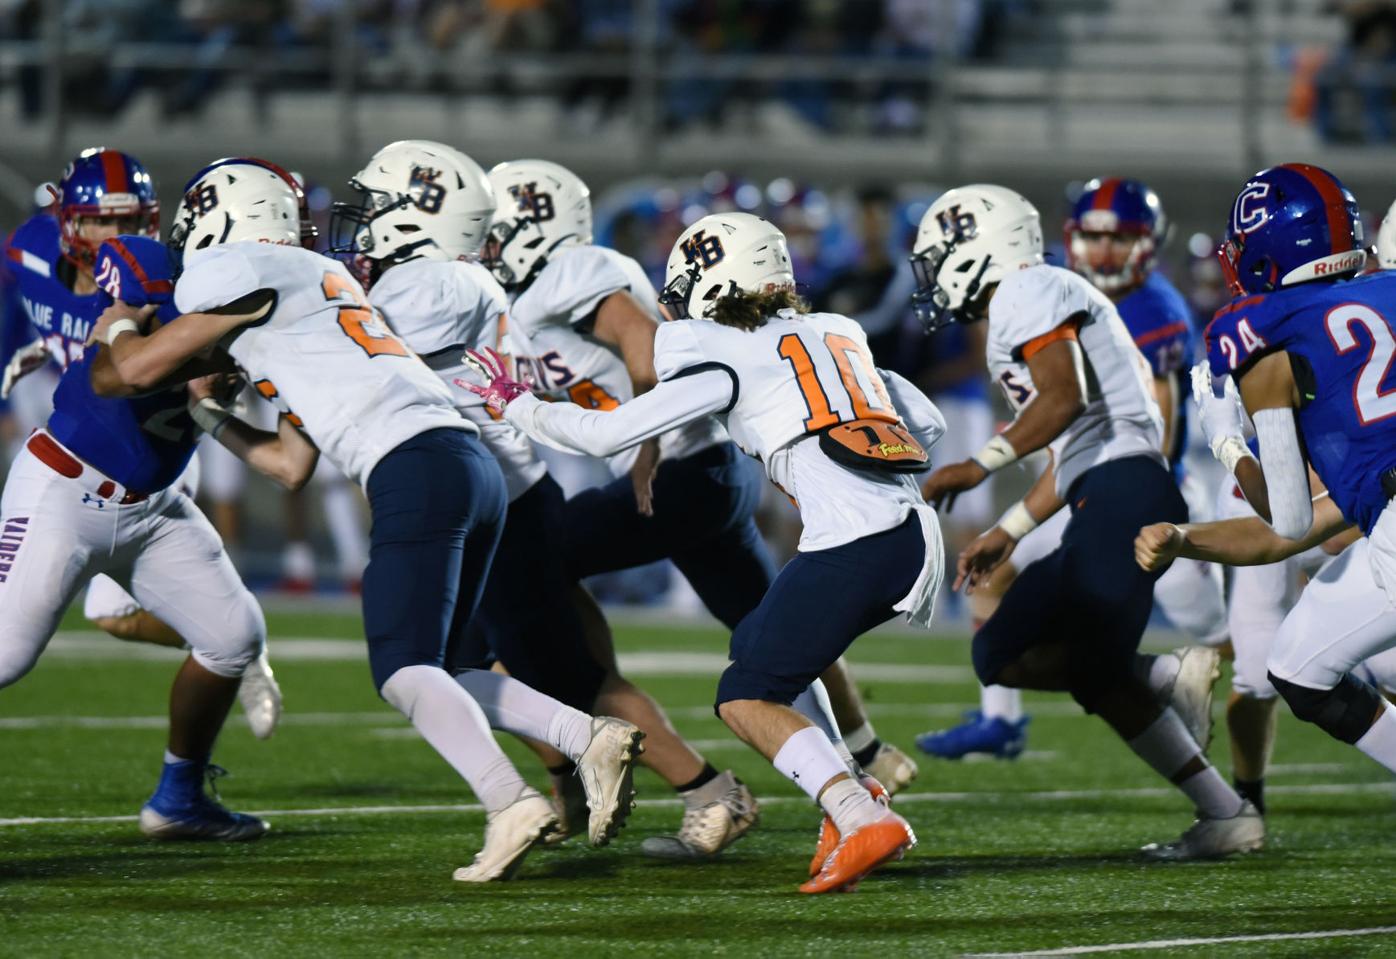 William Blount football's playoff hopes dashed with loss to Cleveland